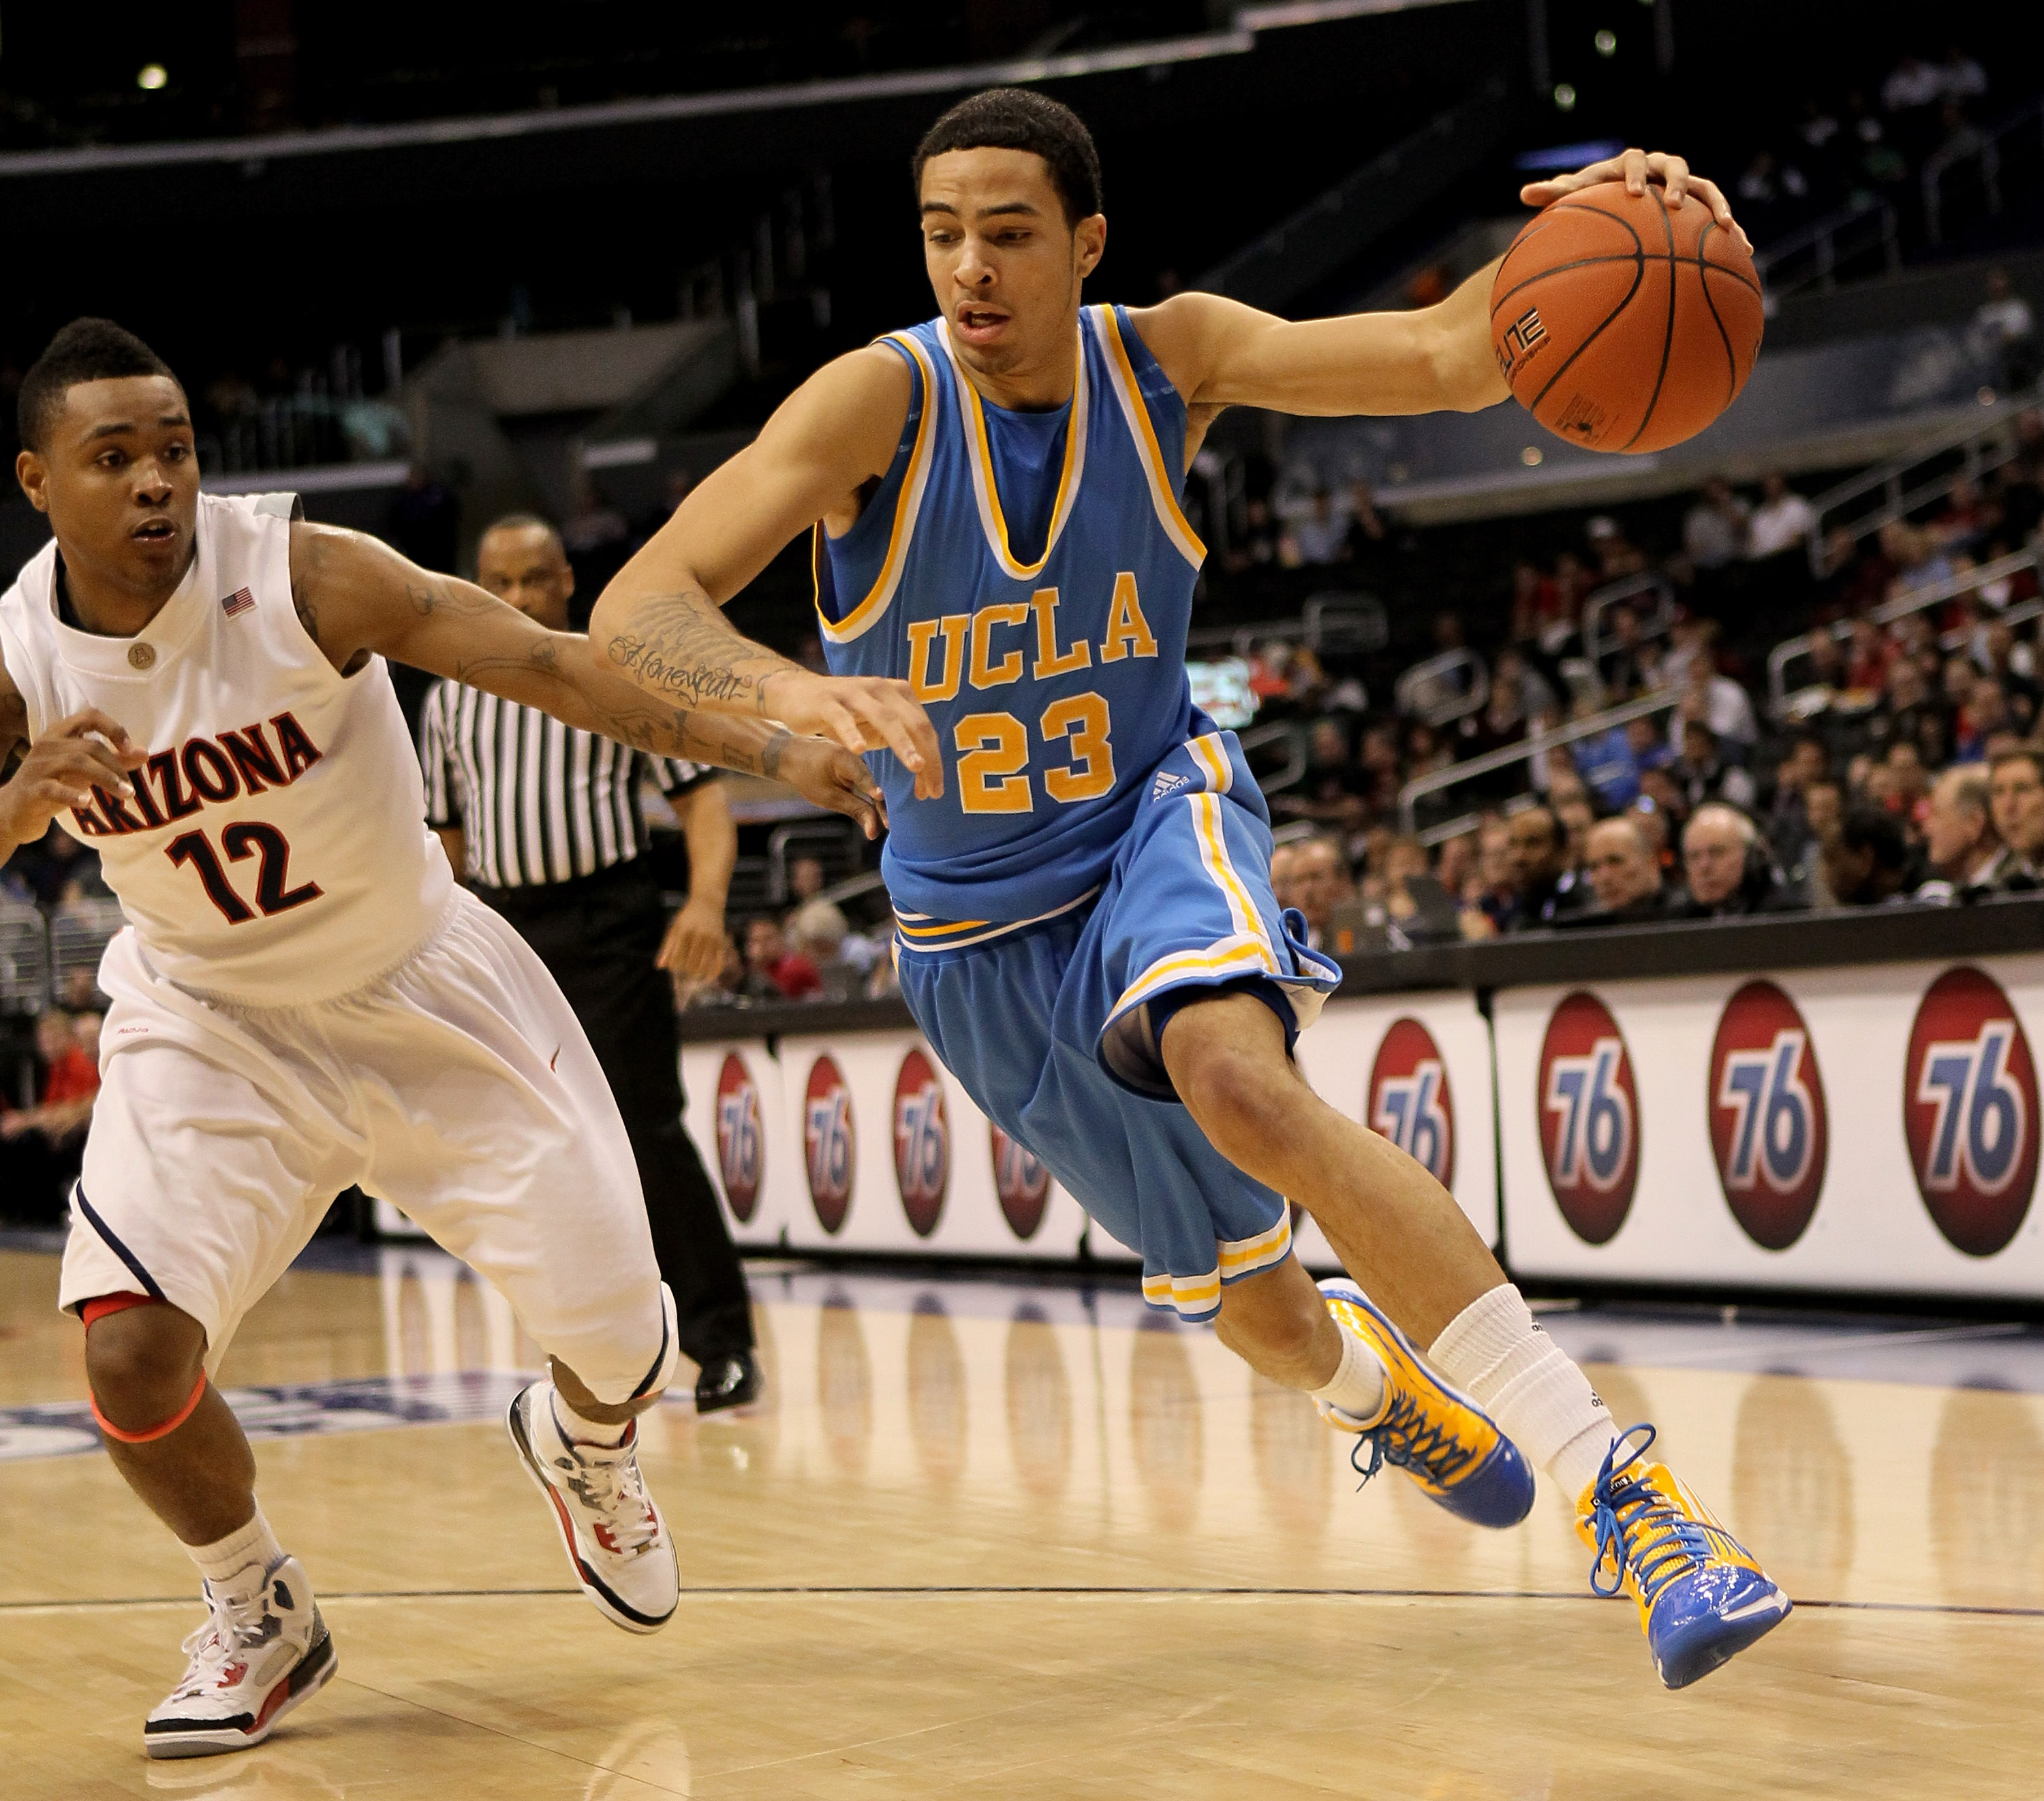 LOS ANGELES, CA - MARCH 11:  Tyler Honeycutt #23 of the UCLA Bruins drives around Lamont Jones #12 of the Arizona Wildcats during the quarterfinals of the Pac-10 Basketball Tournament at Staples Center on March 11, 2010 in Los Angeles, California. UCLA wo